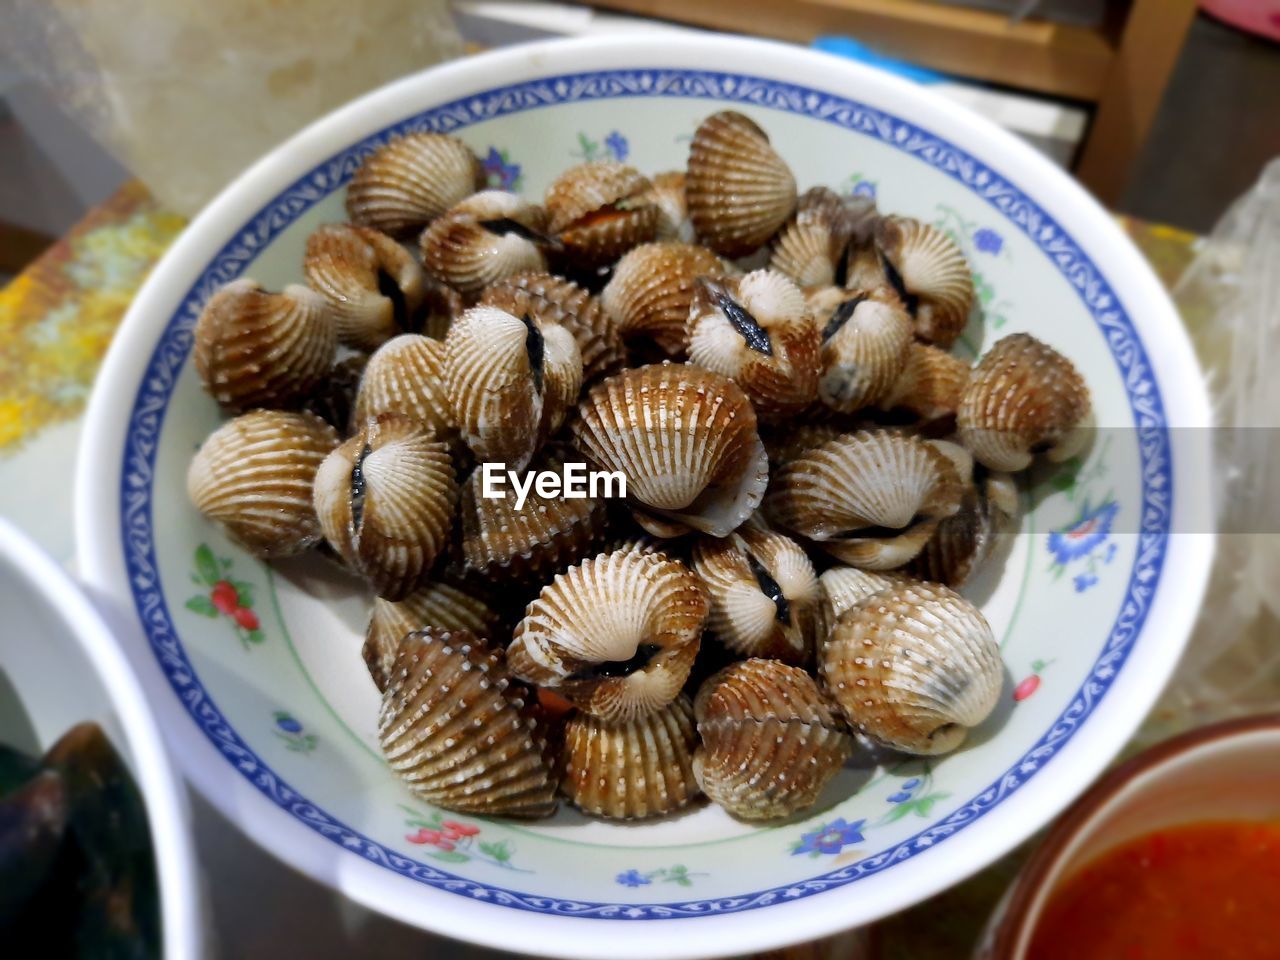 HIGH ANGLE VIEW OF SHELLS IN BOWL